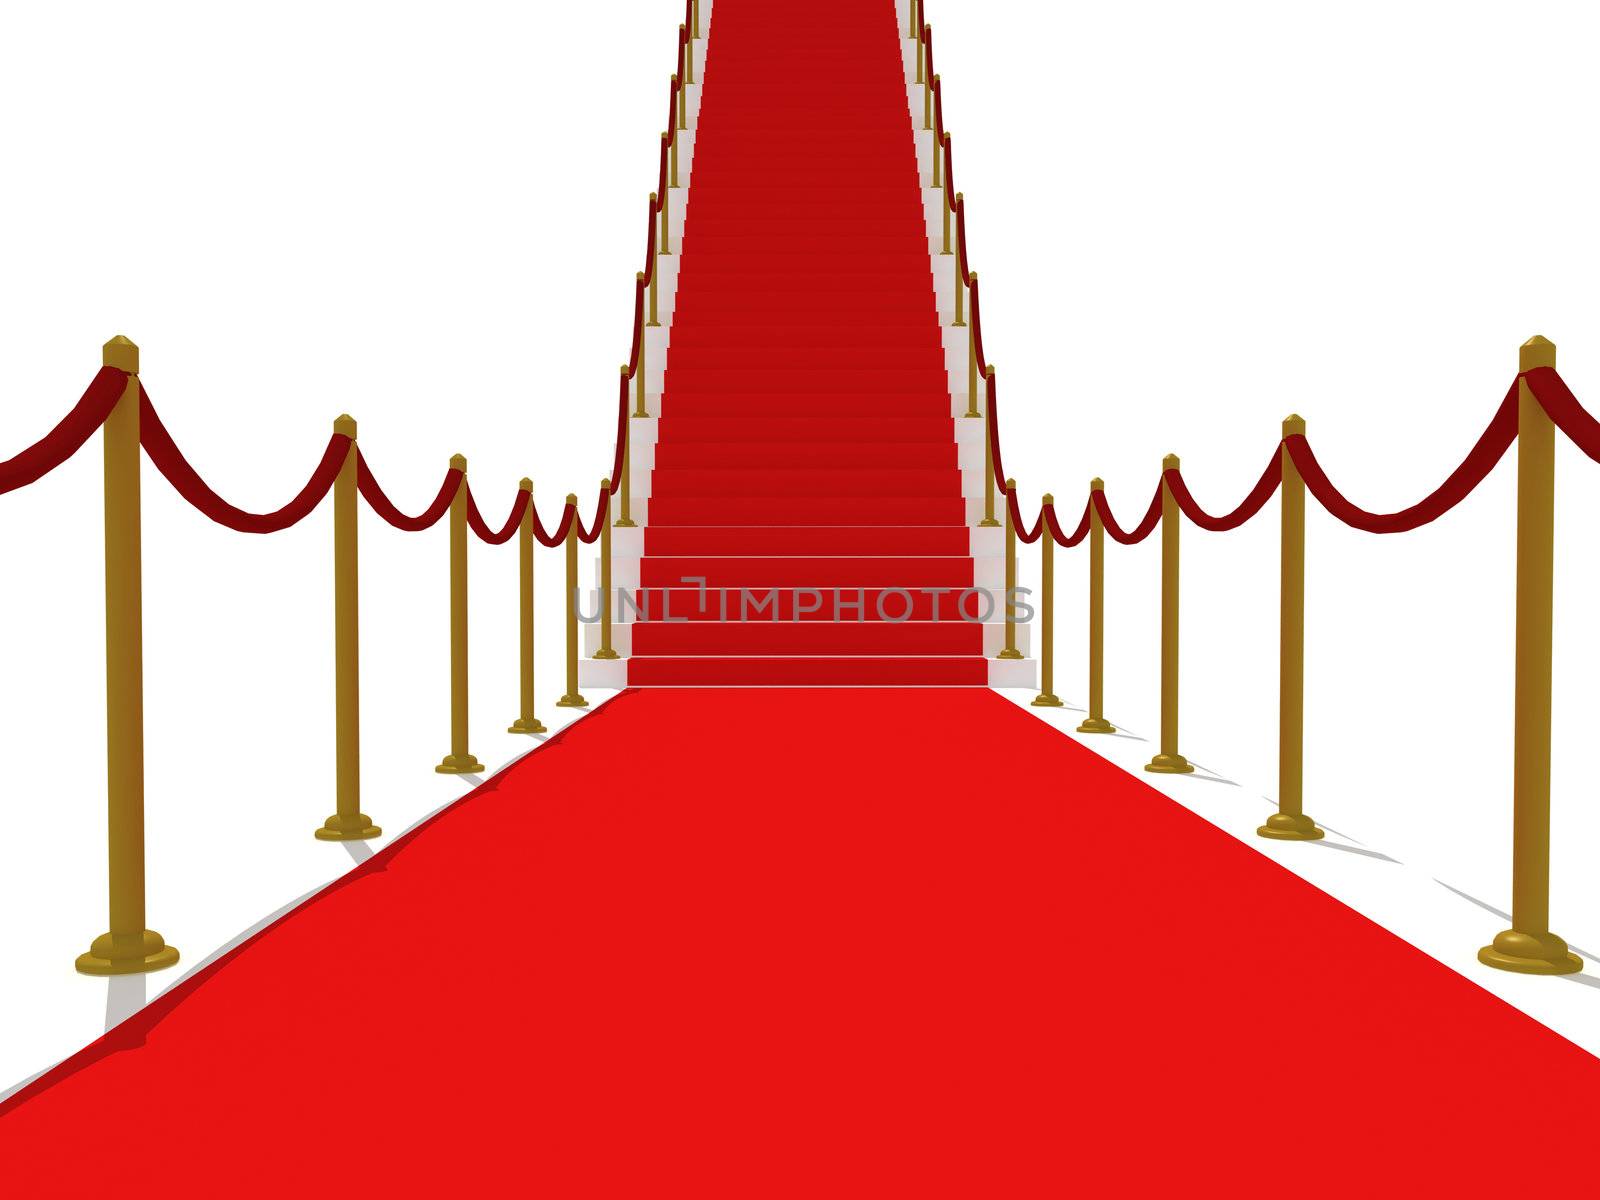 Red Carpet Stairs - Stairway to fame by dacasdo